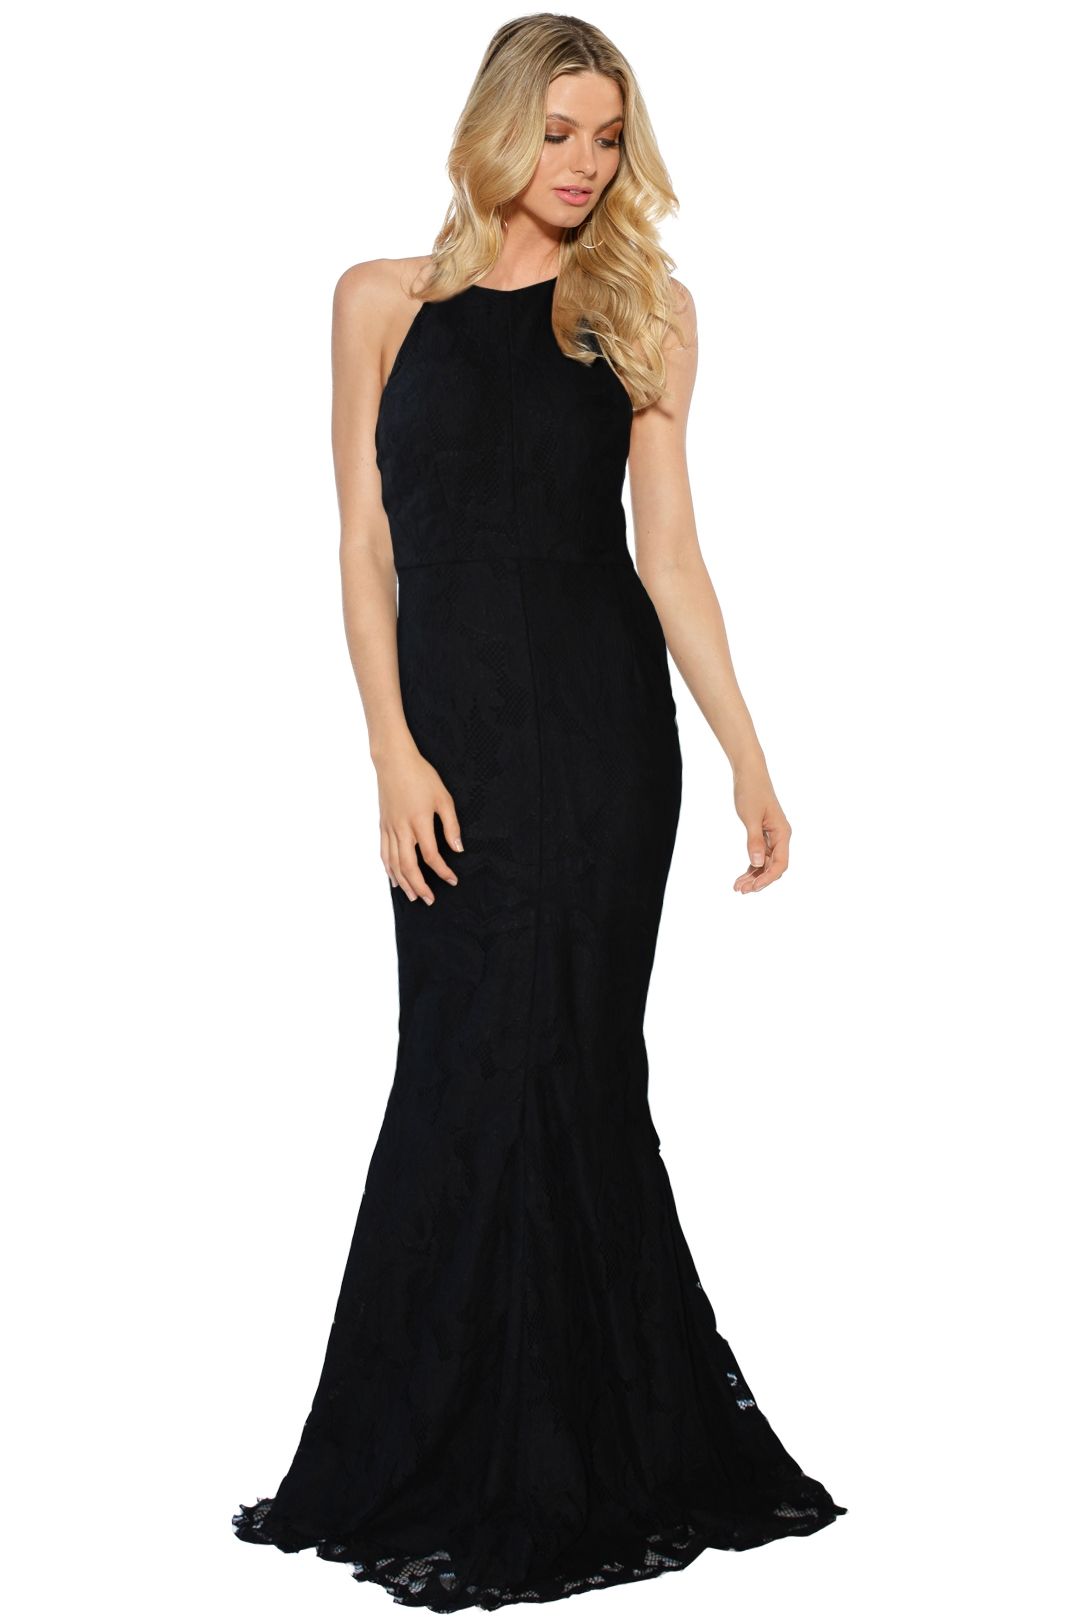 Grace and Hart - Allure Gown - Black - Front